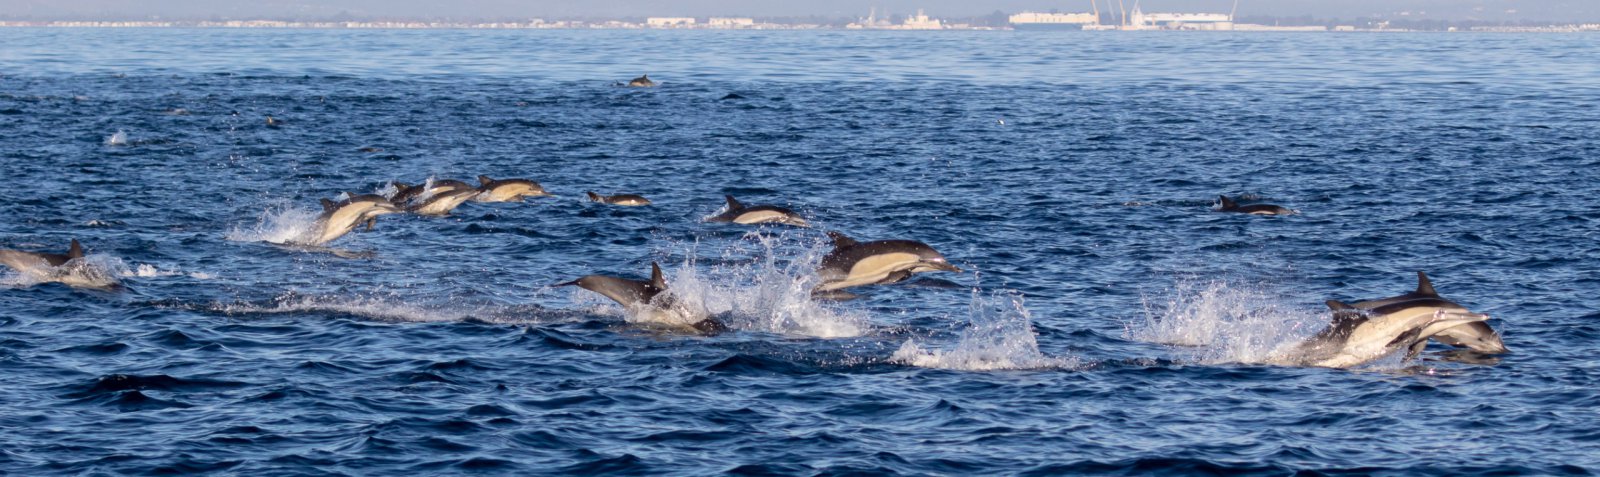 Ten Things You Didn’t Know About Ventura’s Magical Dolphins